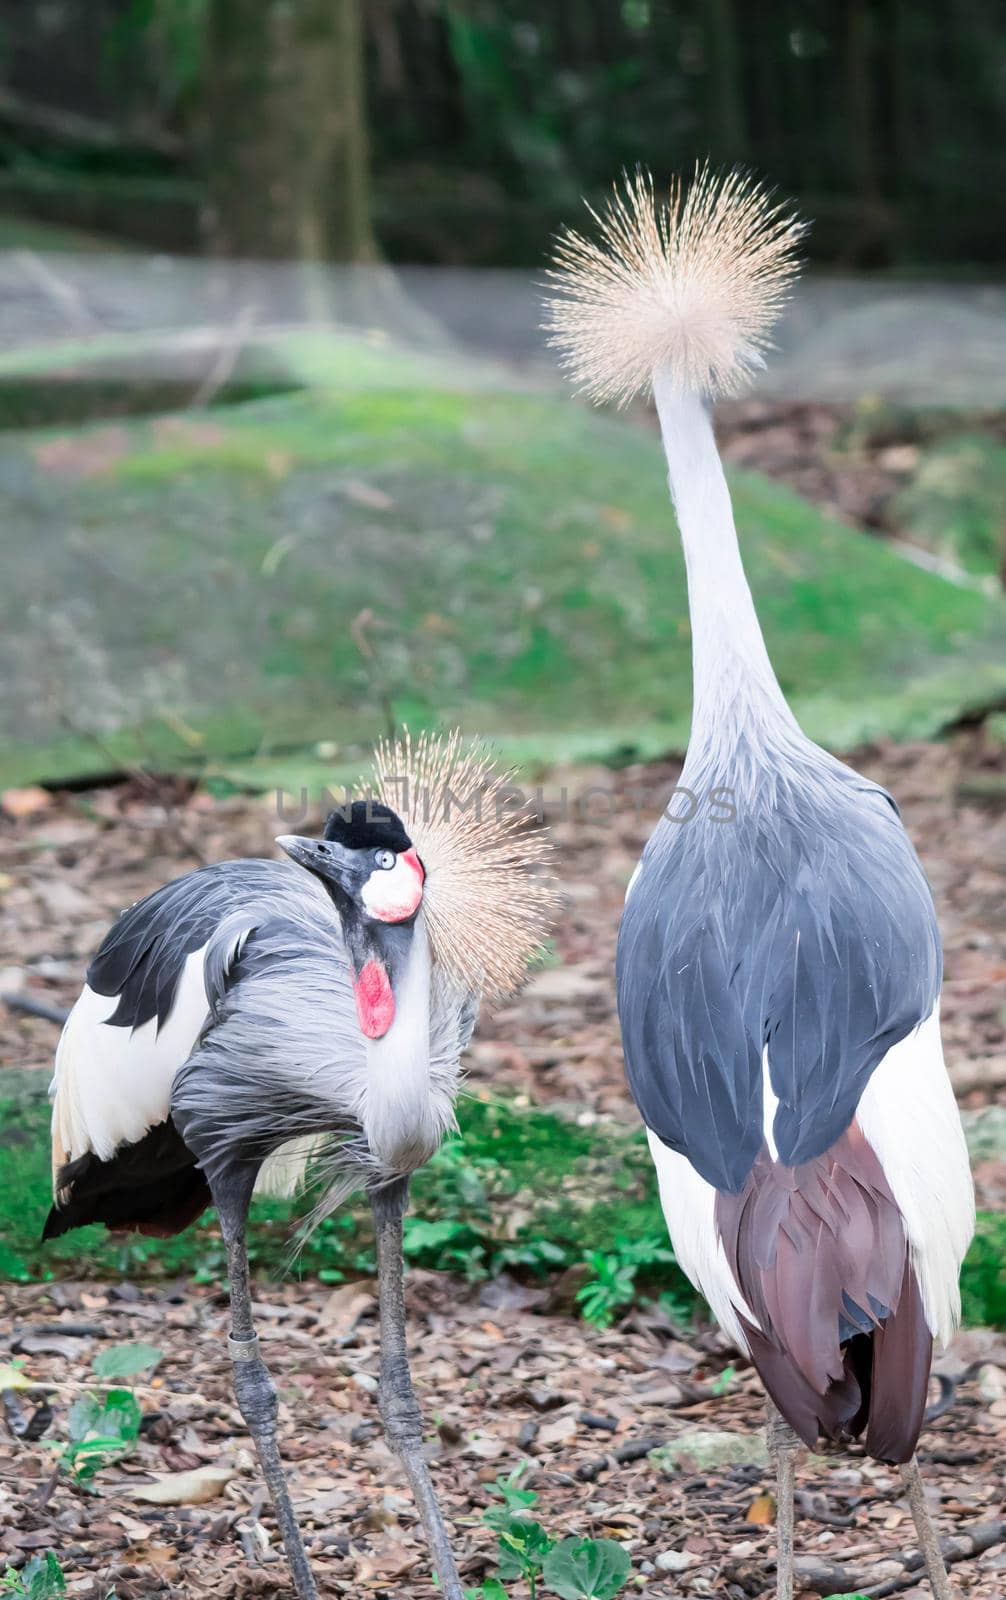 A Grey crowned crane, also known as the African crowned crane, golden crested crane, golden crowned crane, East African crane, East African crowned crane, Eastern crowned crane, South African crane